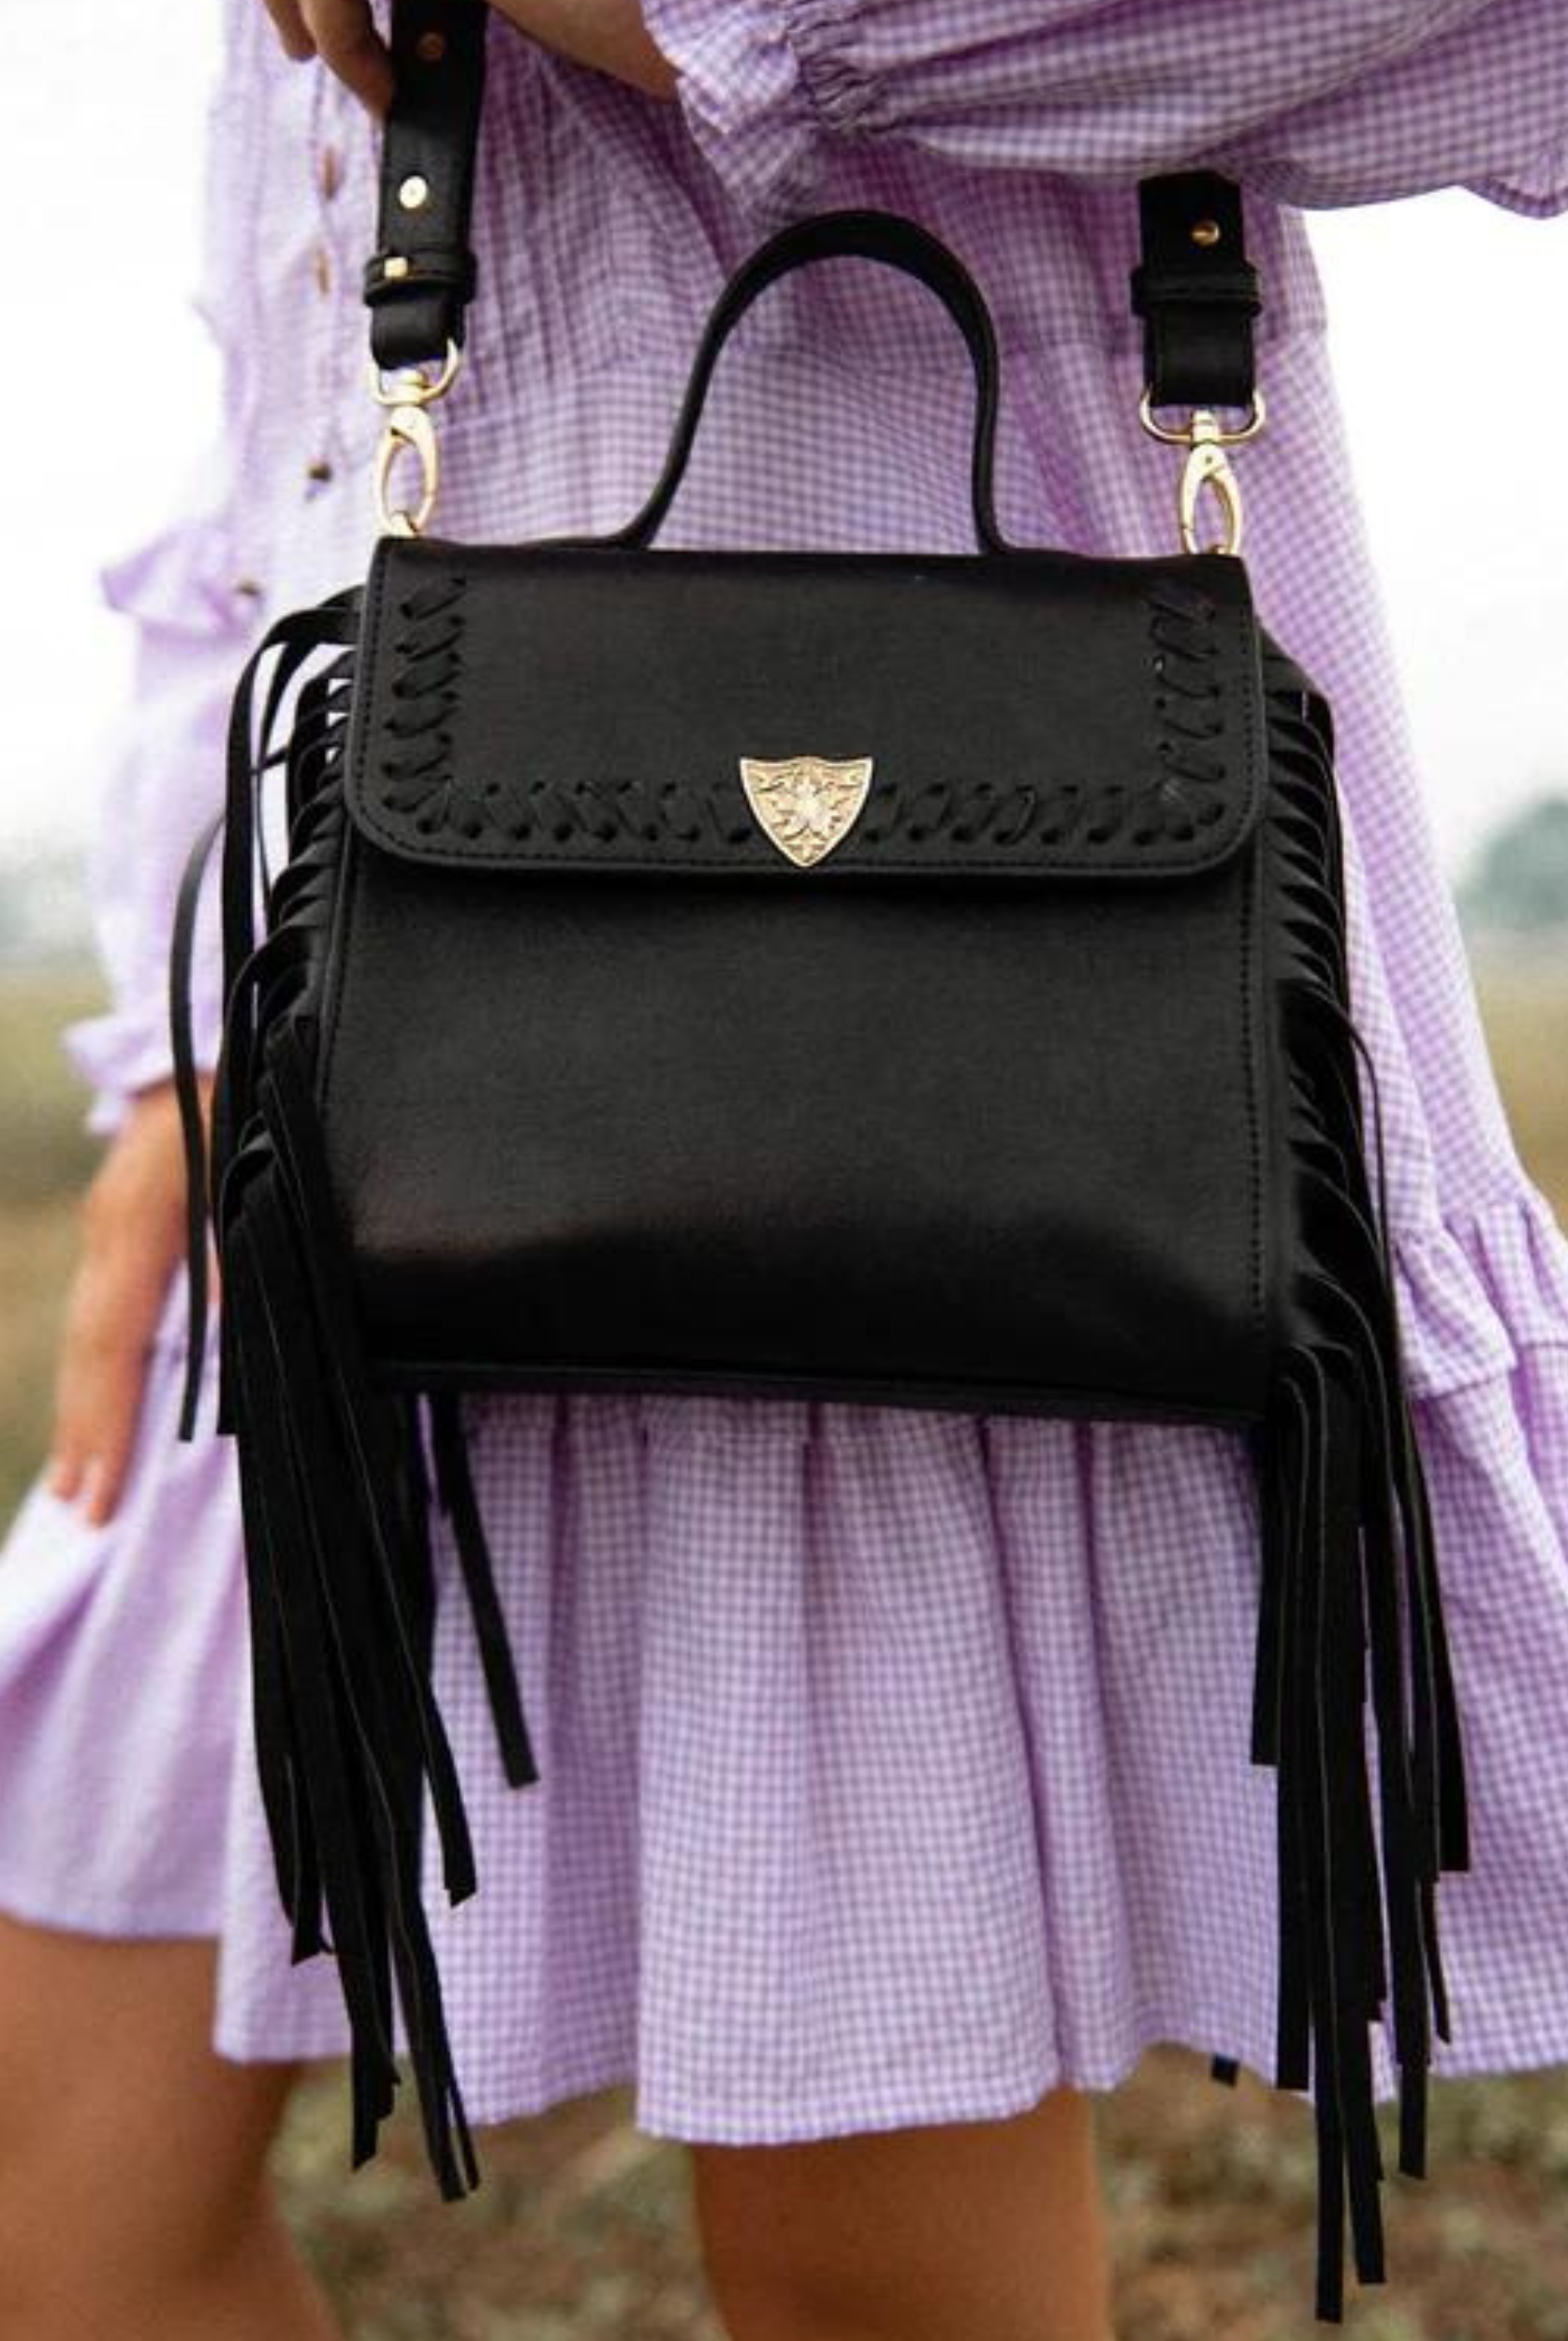 The Innerbloom black bag made in leather with fringing